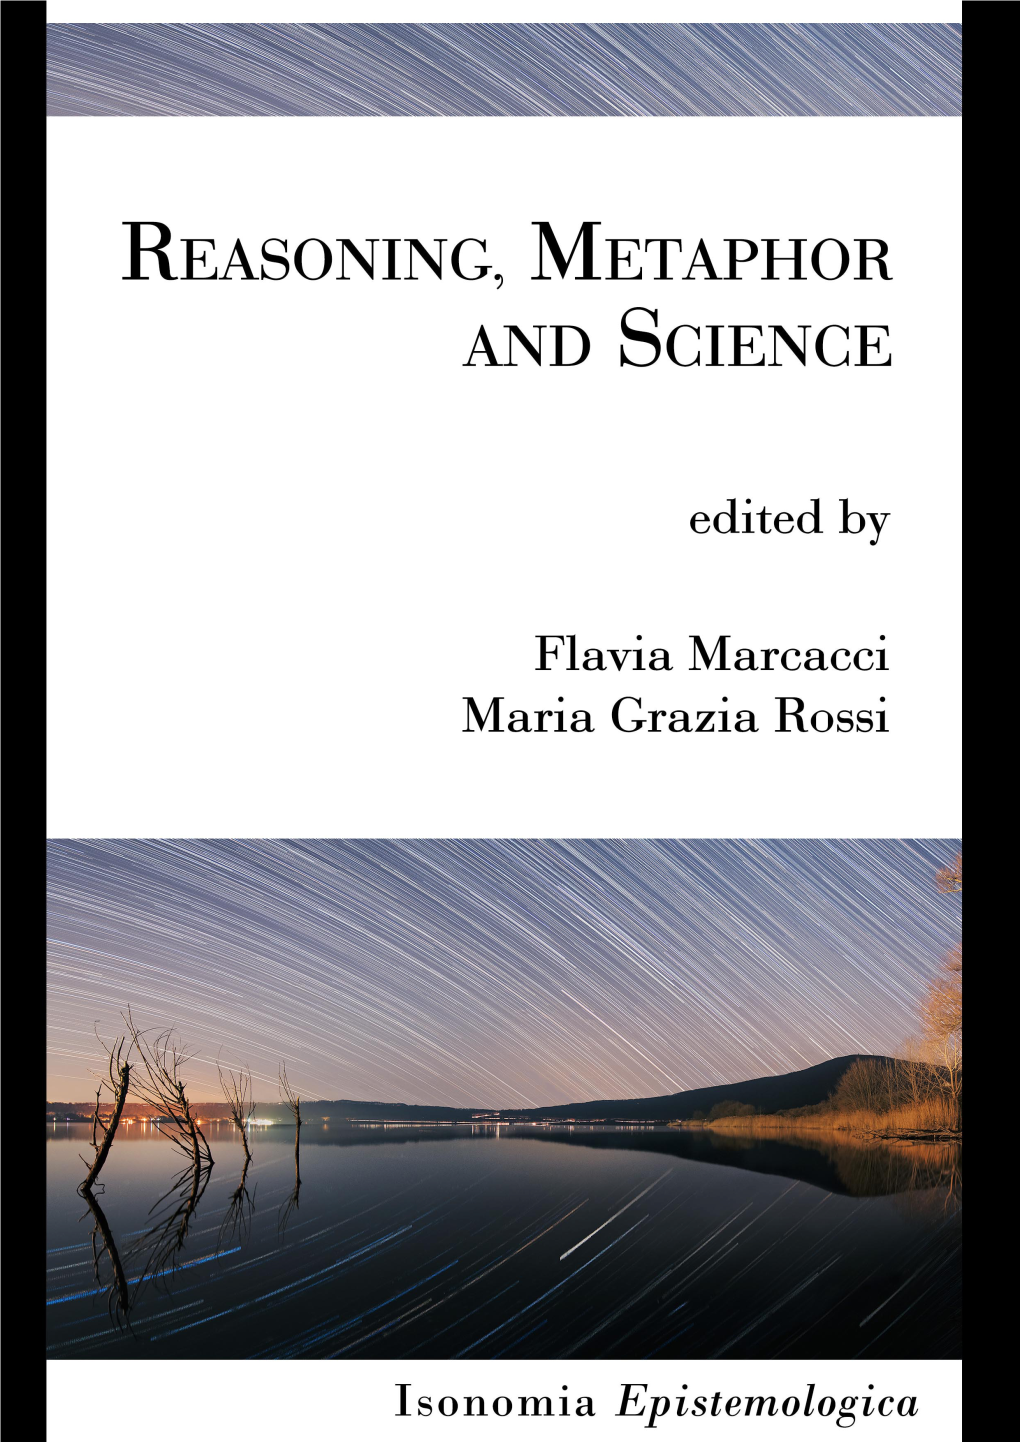 Marcacci-Rossi, Reasoning, Metaphor and Science Vol.9 2017